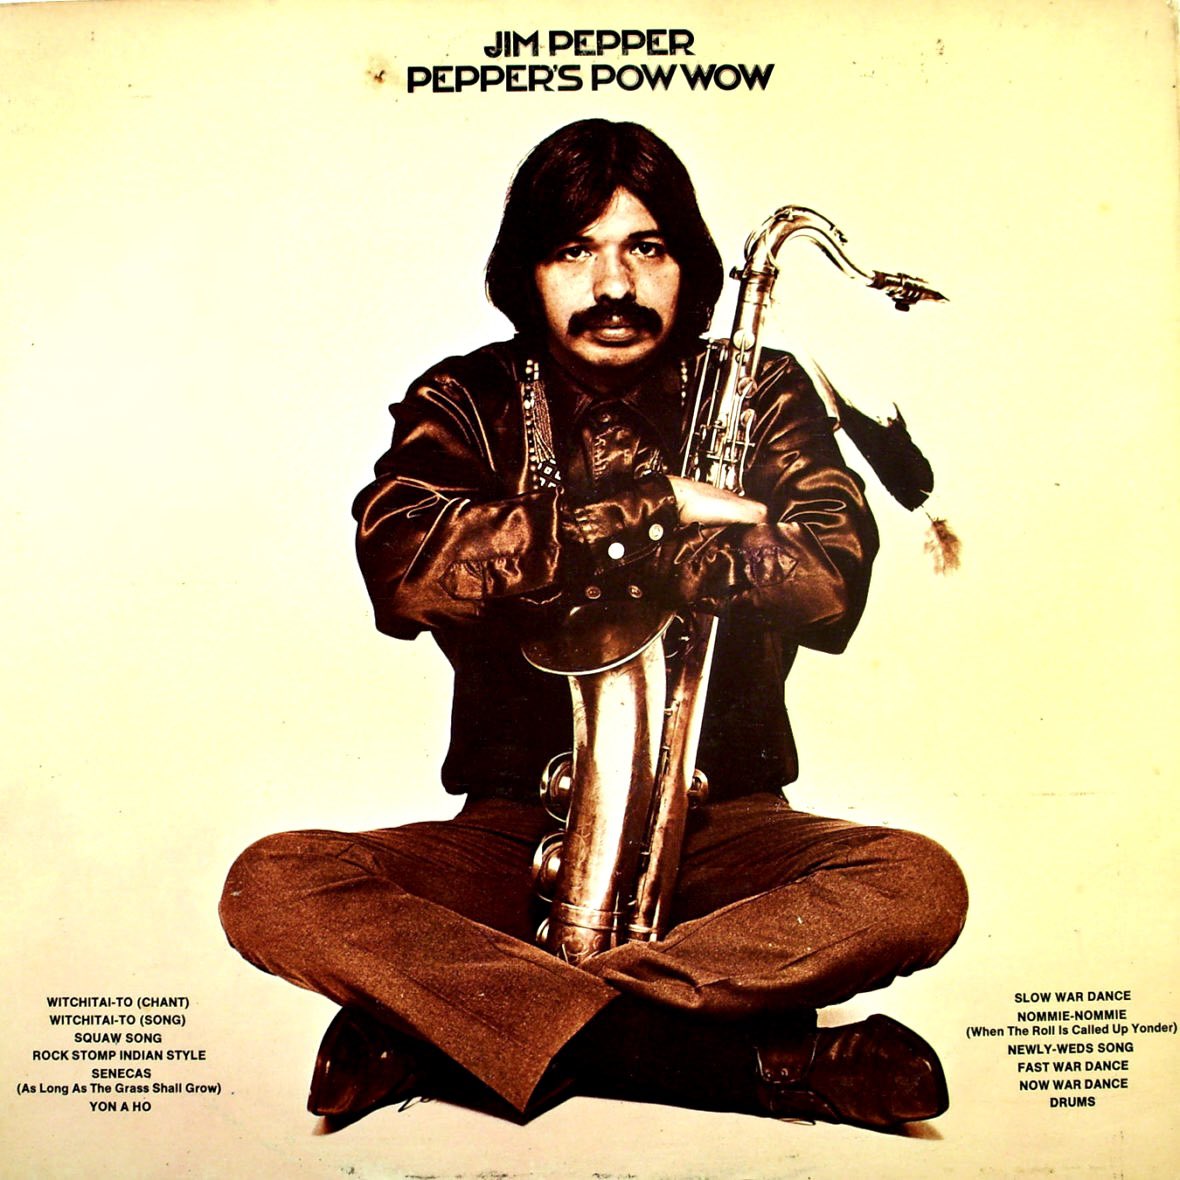 Jazz musician Jim Pepper 1941-1992 (Kaw/Creek) ‘The success of “Witchi-Tai-To,” led him to alternate mainstream and avant-garde jazz with performances of Creek, Lakota, Caddo, and other American Indian songs.’ - PJCE Records